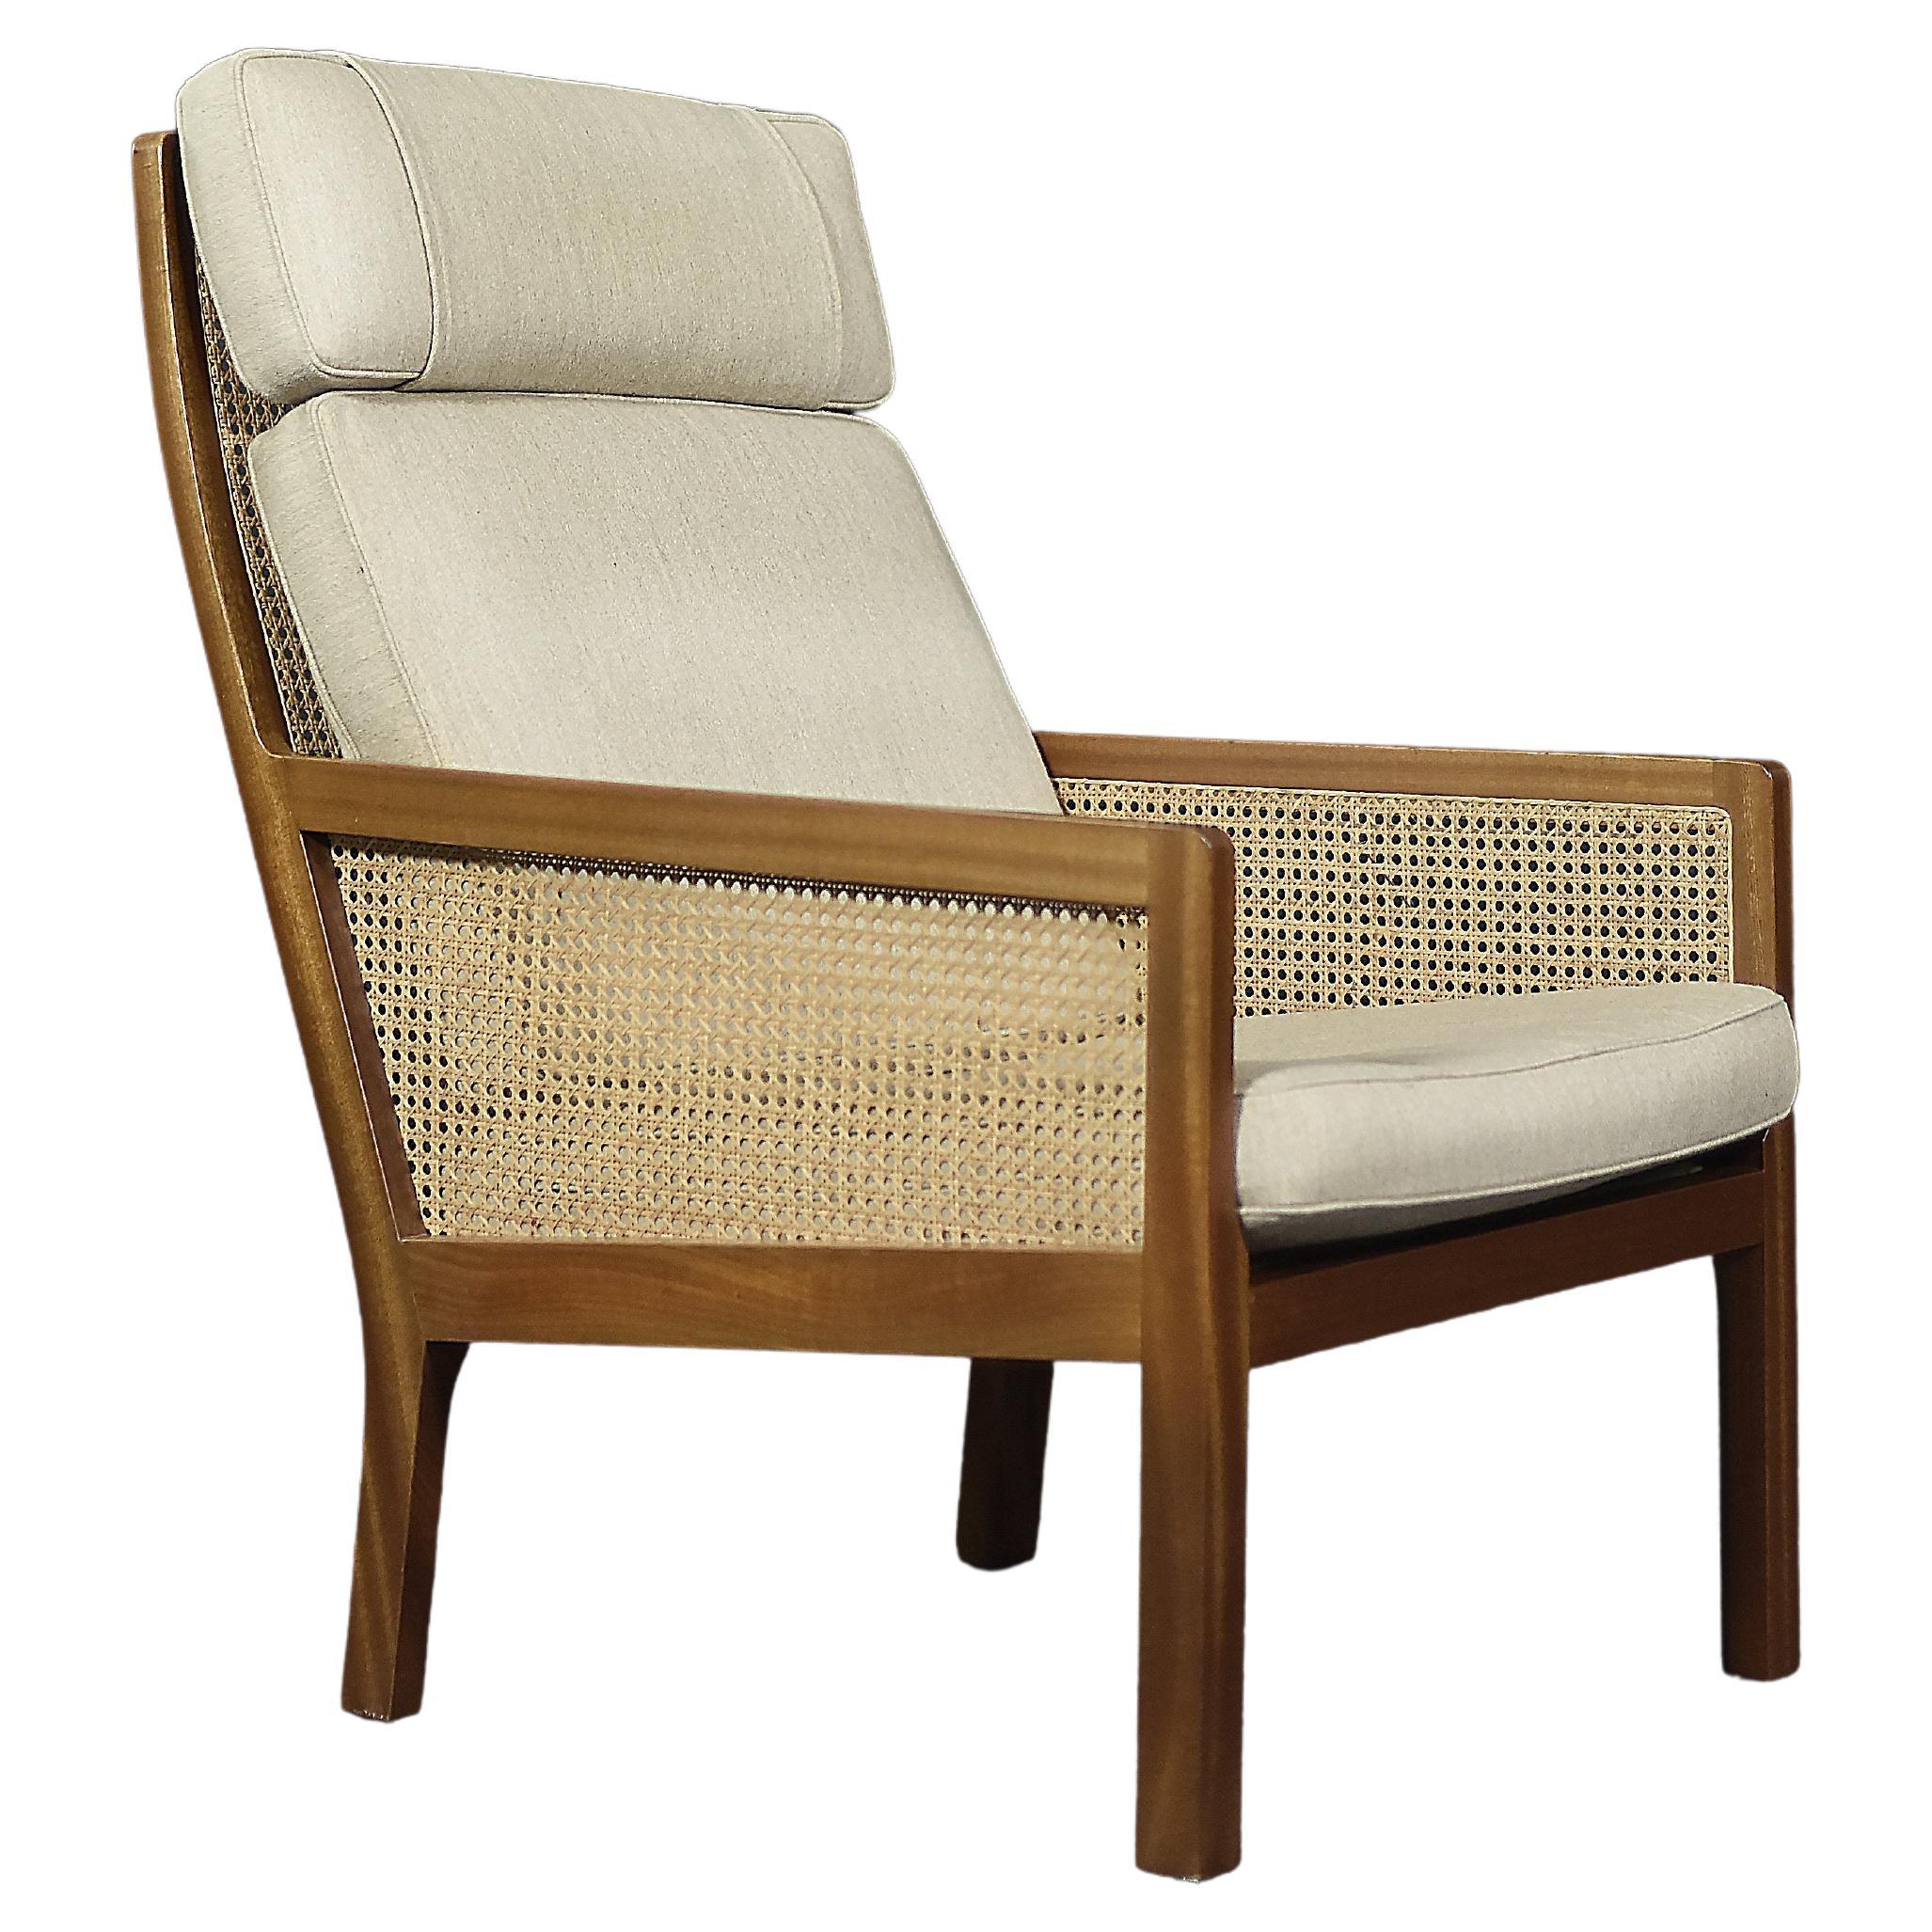 Vintage Midcentury Scandinavian Modern Mahogany Armchair with French Wicker